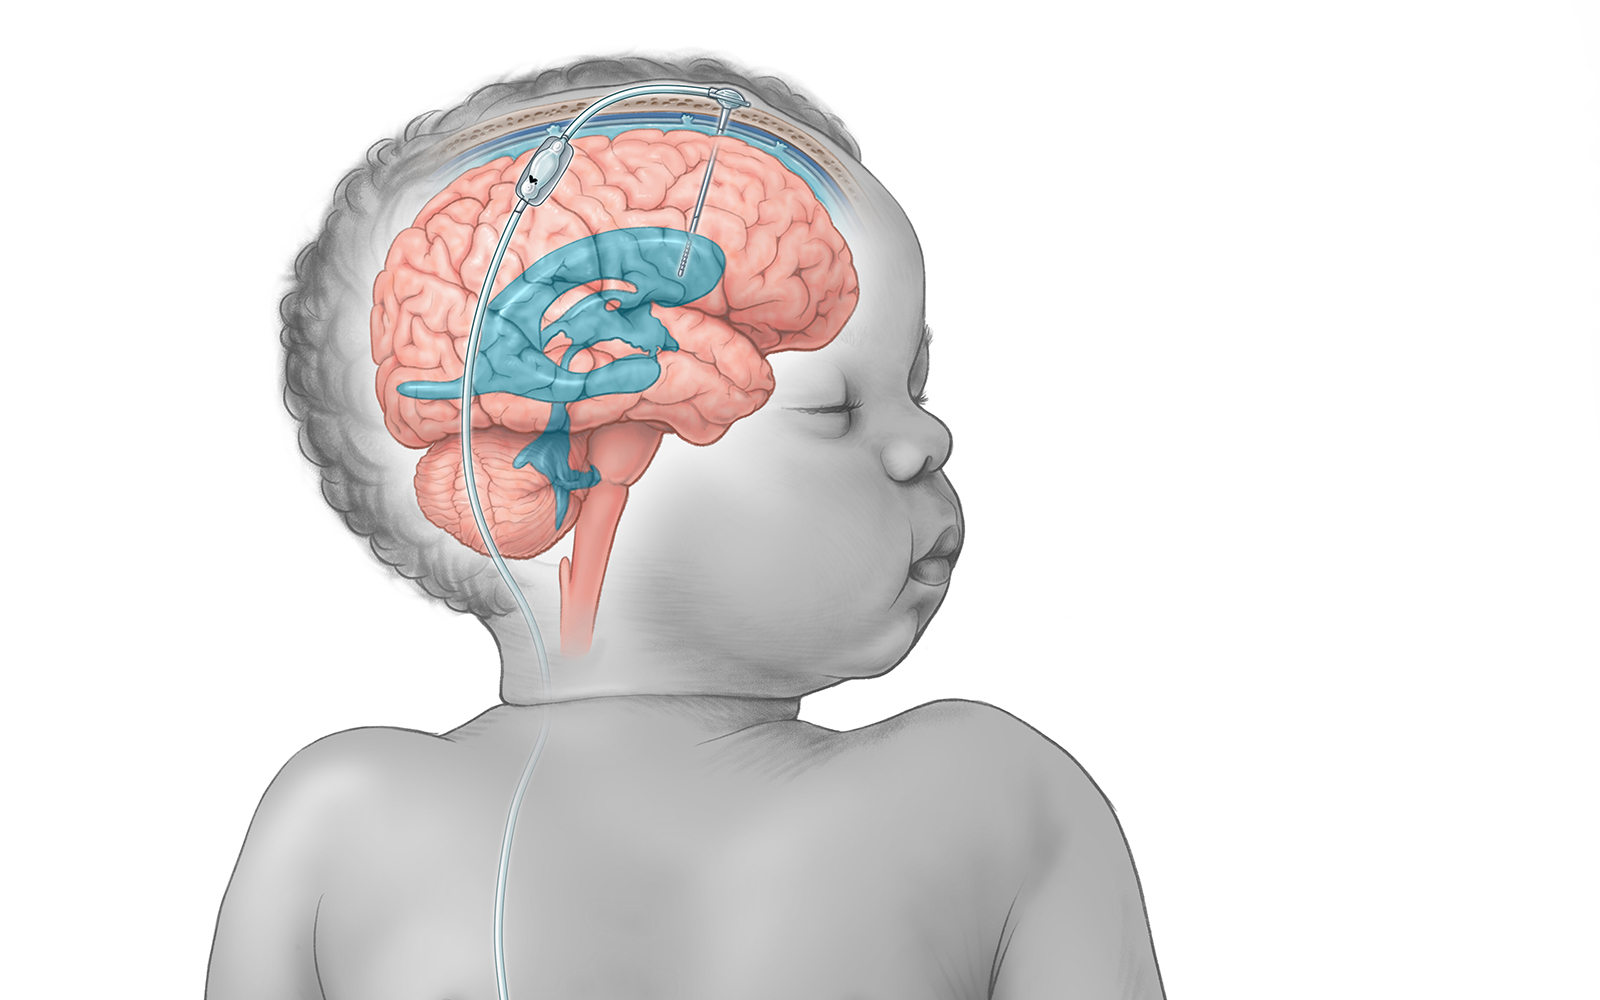 Illustration showing an infant with a shunt to treat hydrocephalus